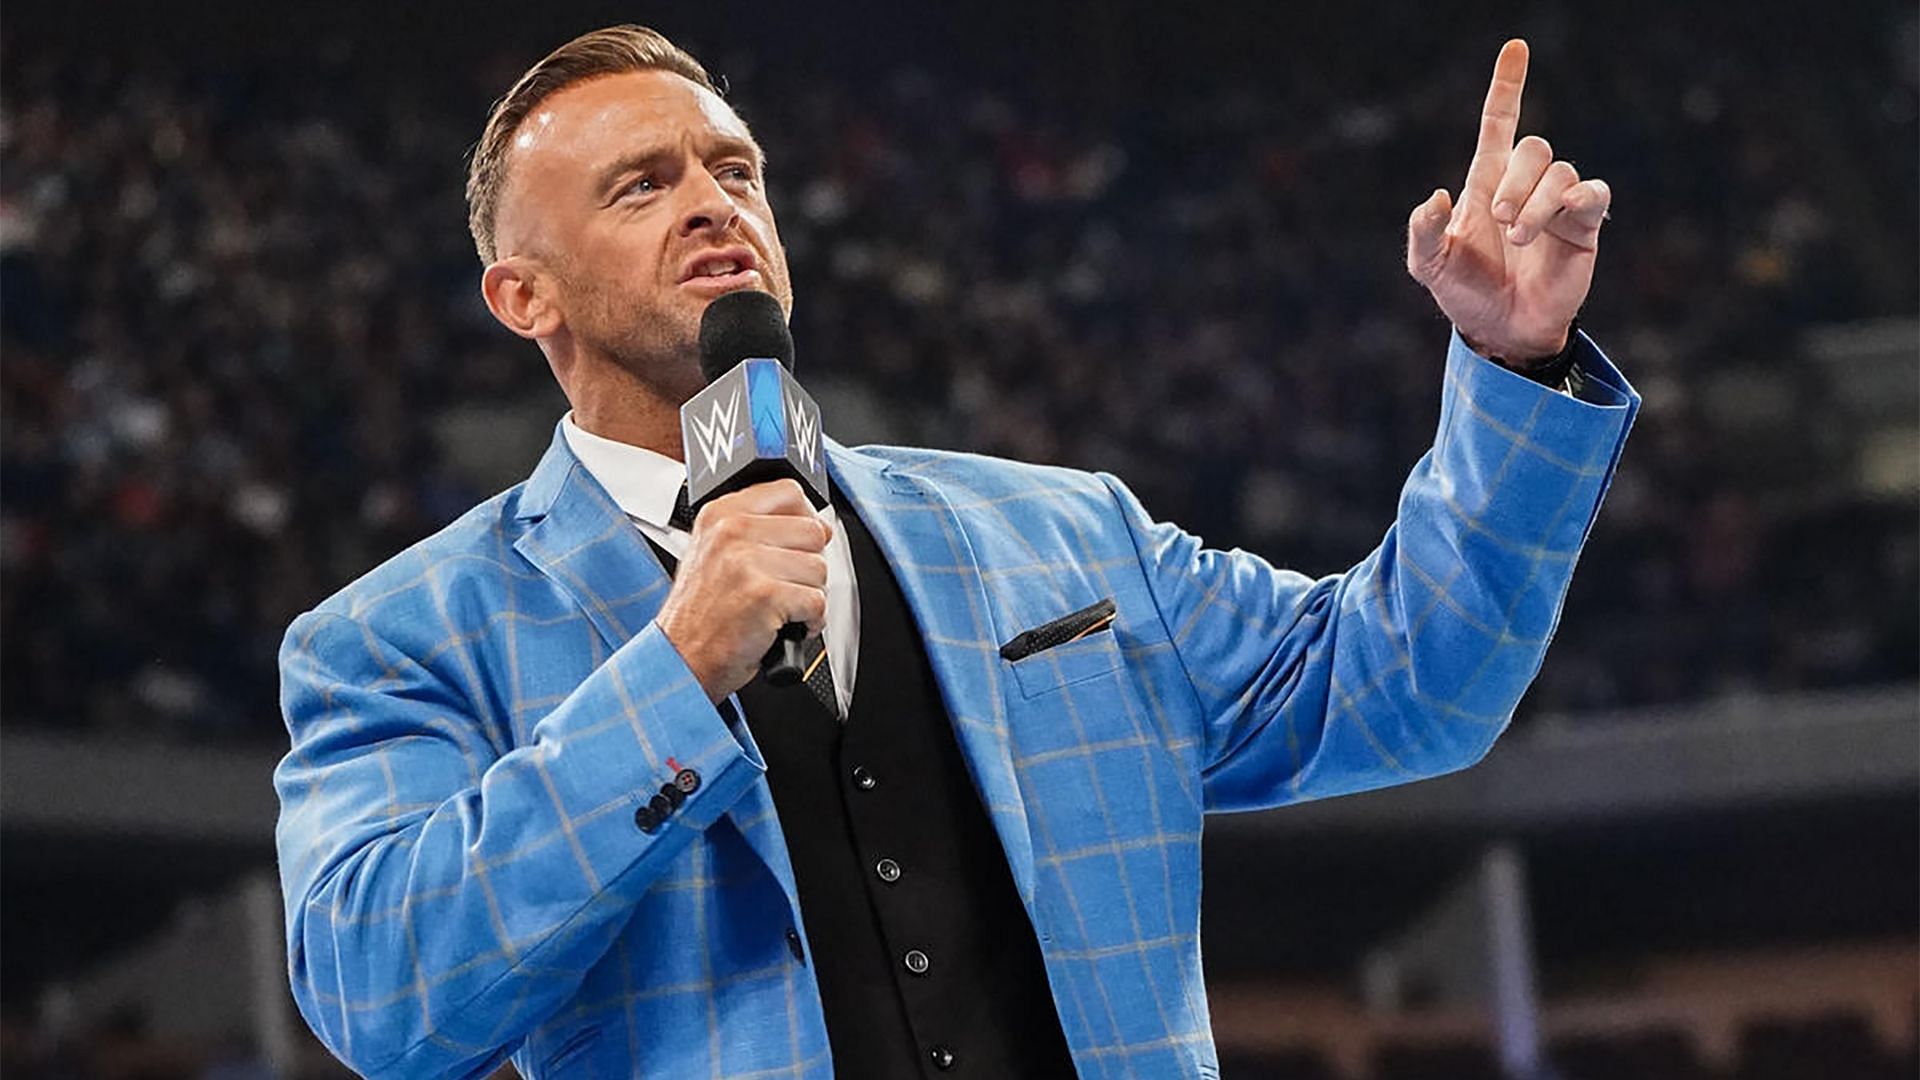 Nick Aldis takes the mic as the WWE SmackDown General Manager